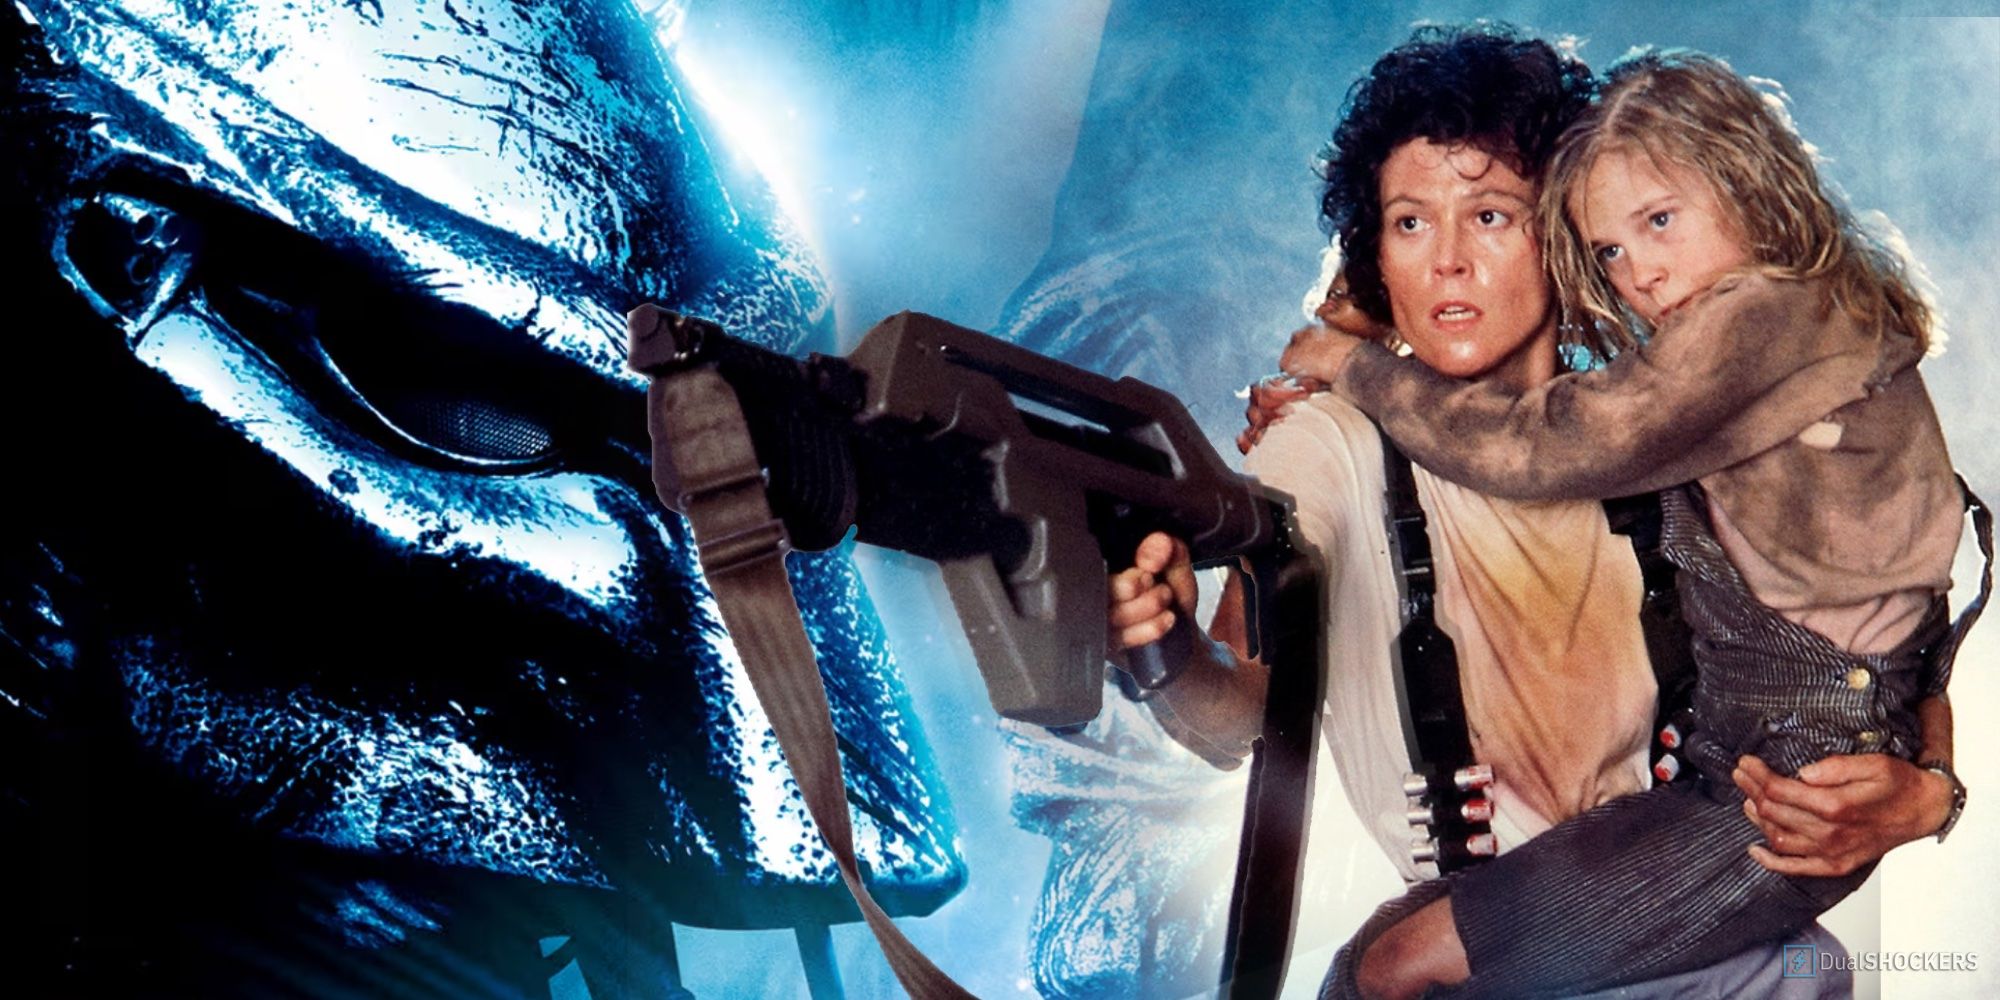 On the right Ripley holding Newt with one hand, and a gun on the other. On the left a Predator